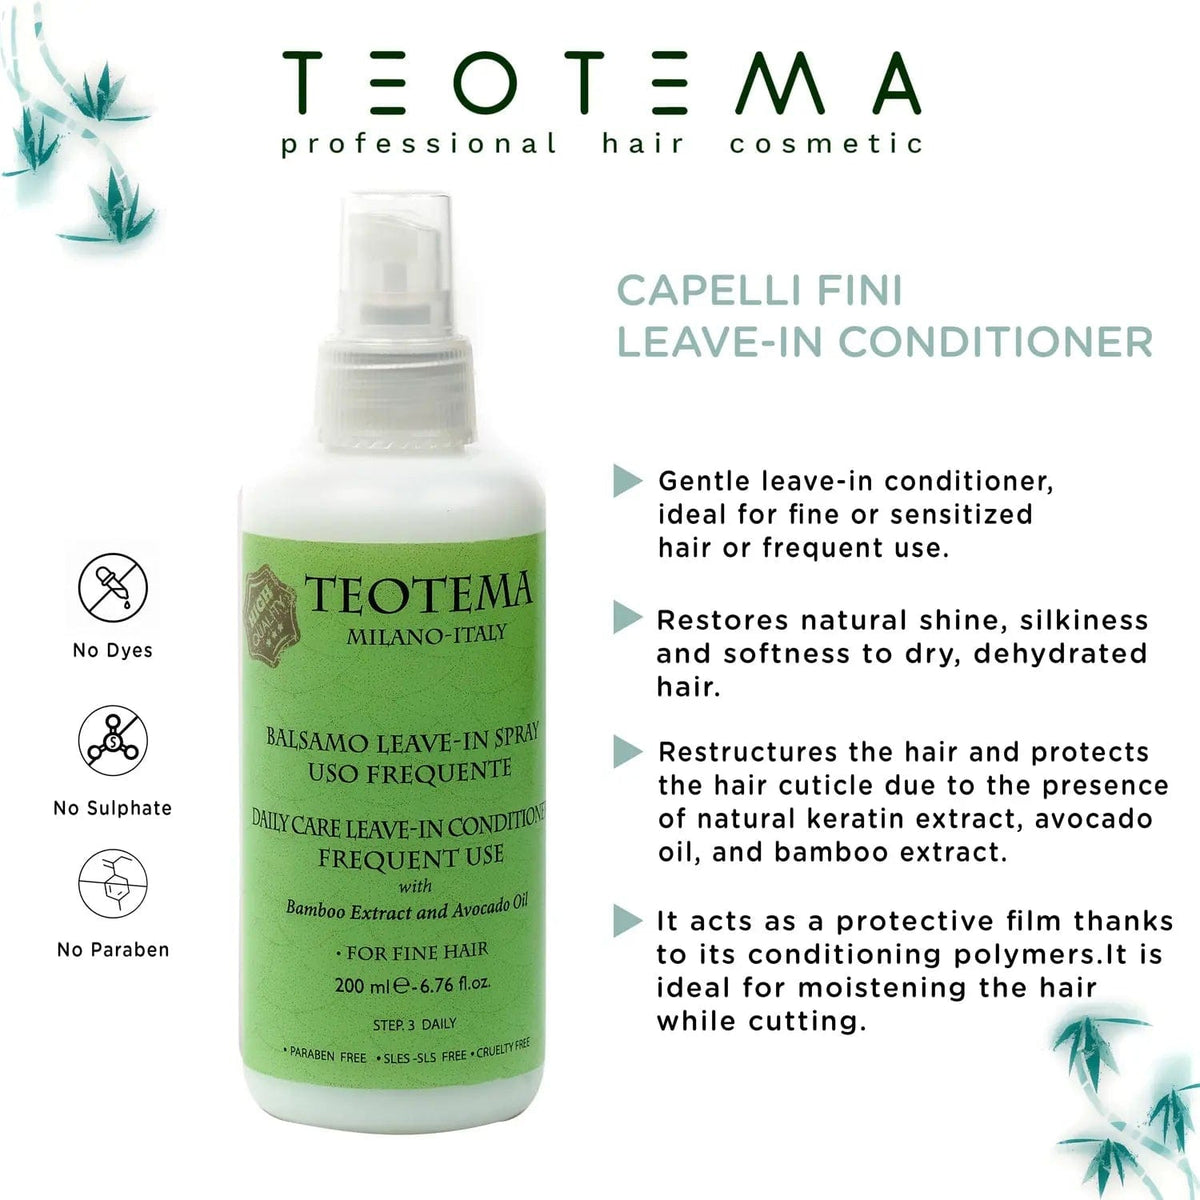 Leave-in Conditioner | Teotema | SLES-SLS Free | Paraben Free